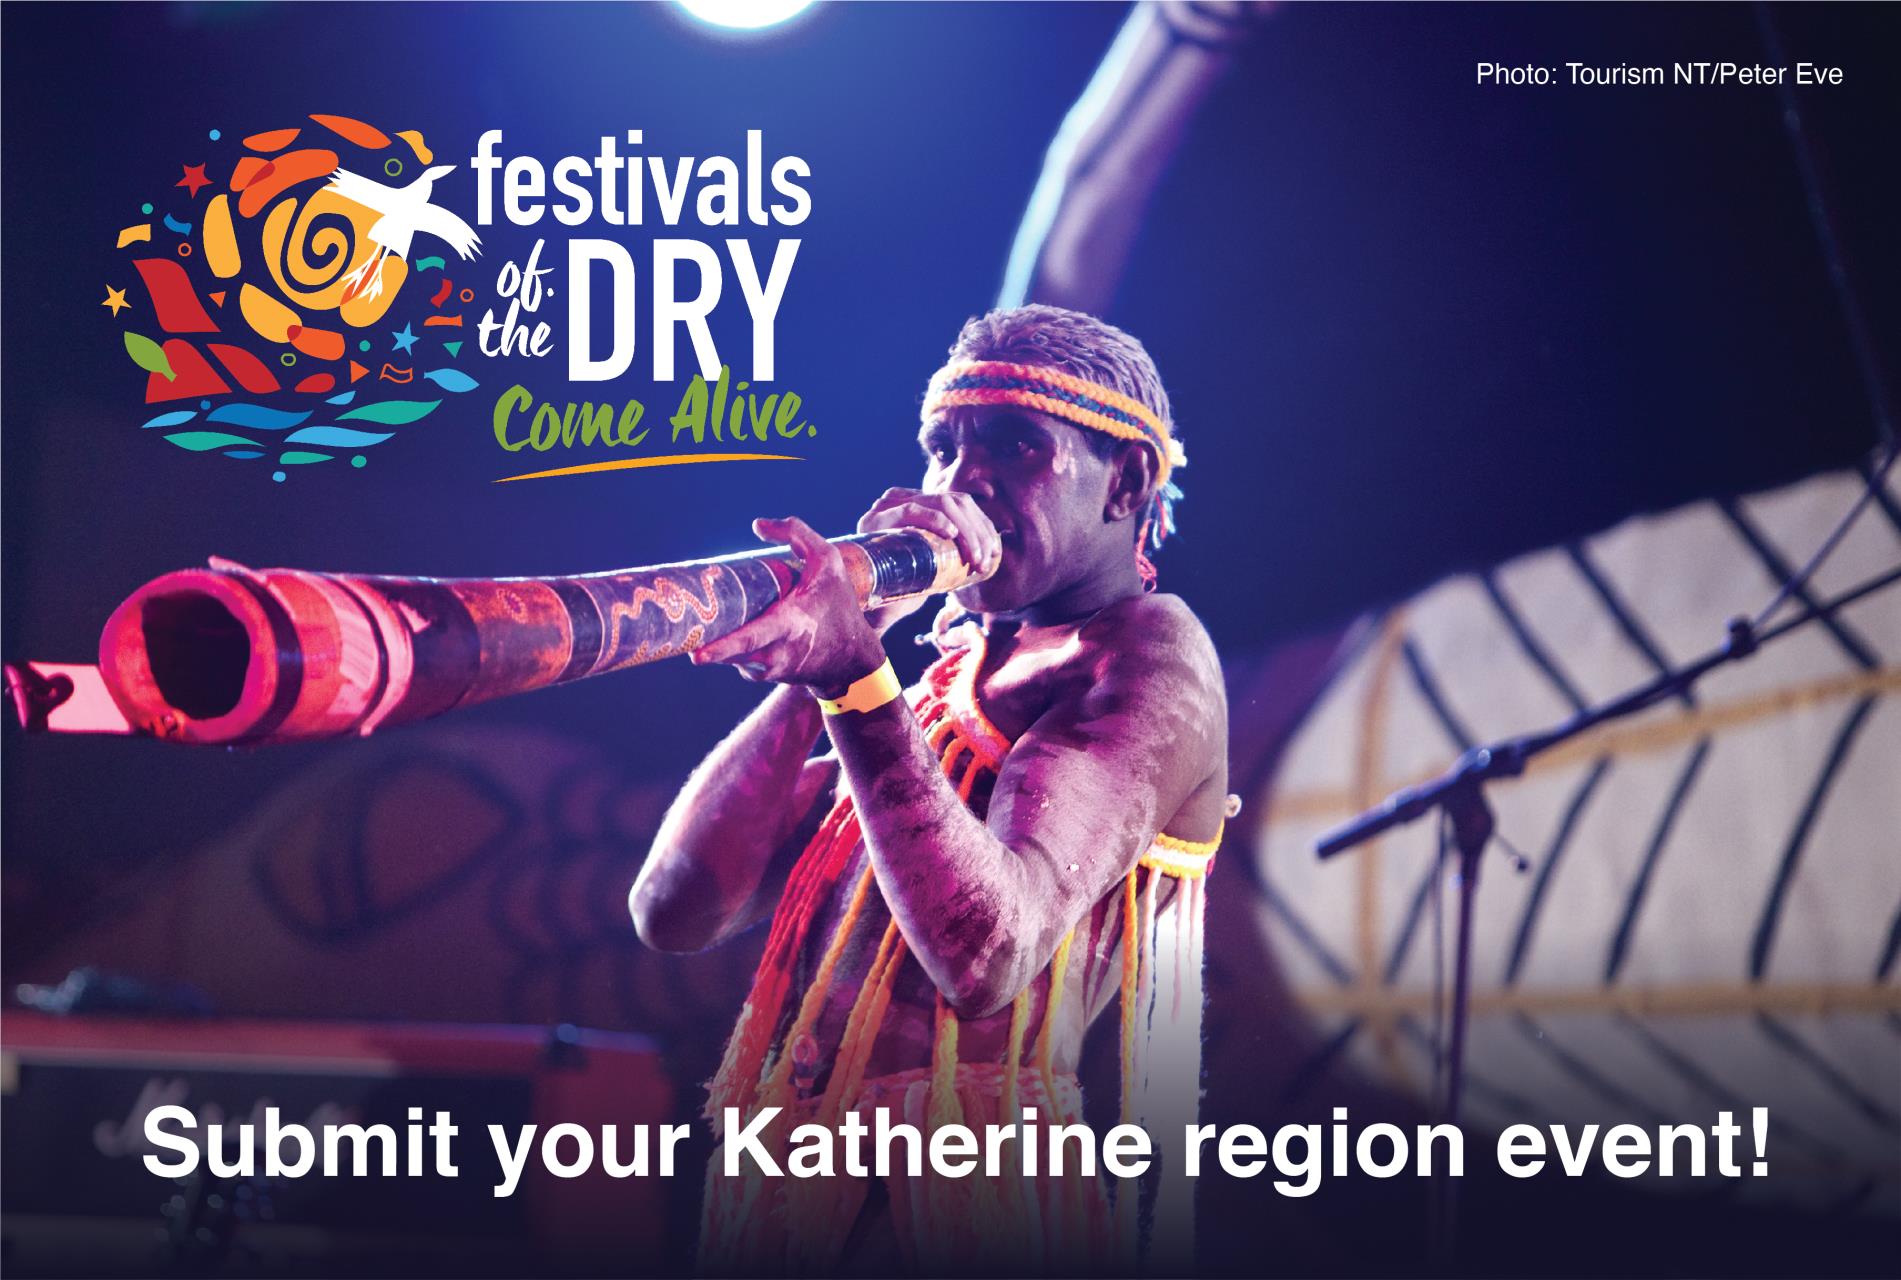 Media Release - Get Your Event into our Festivals of the Dry Calendar